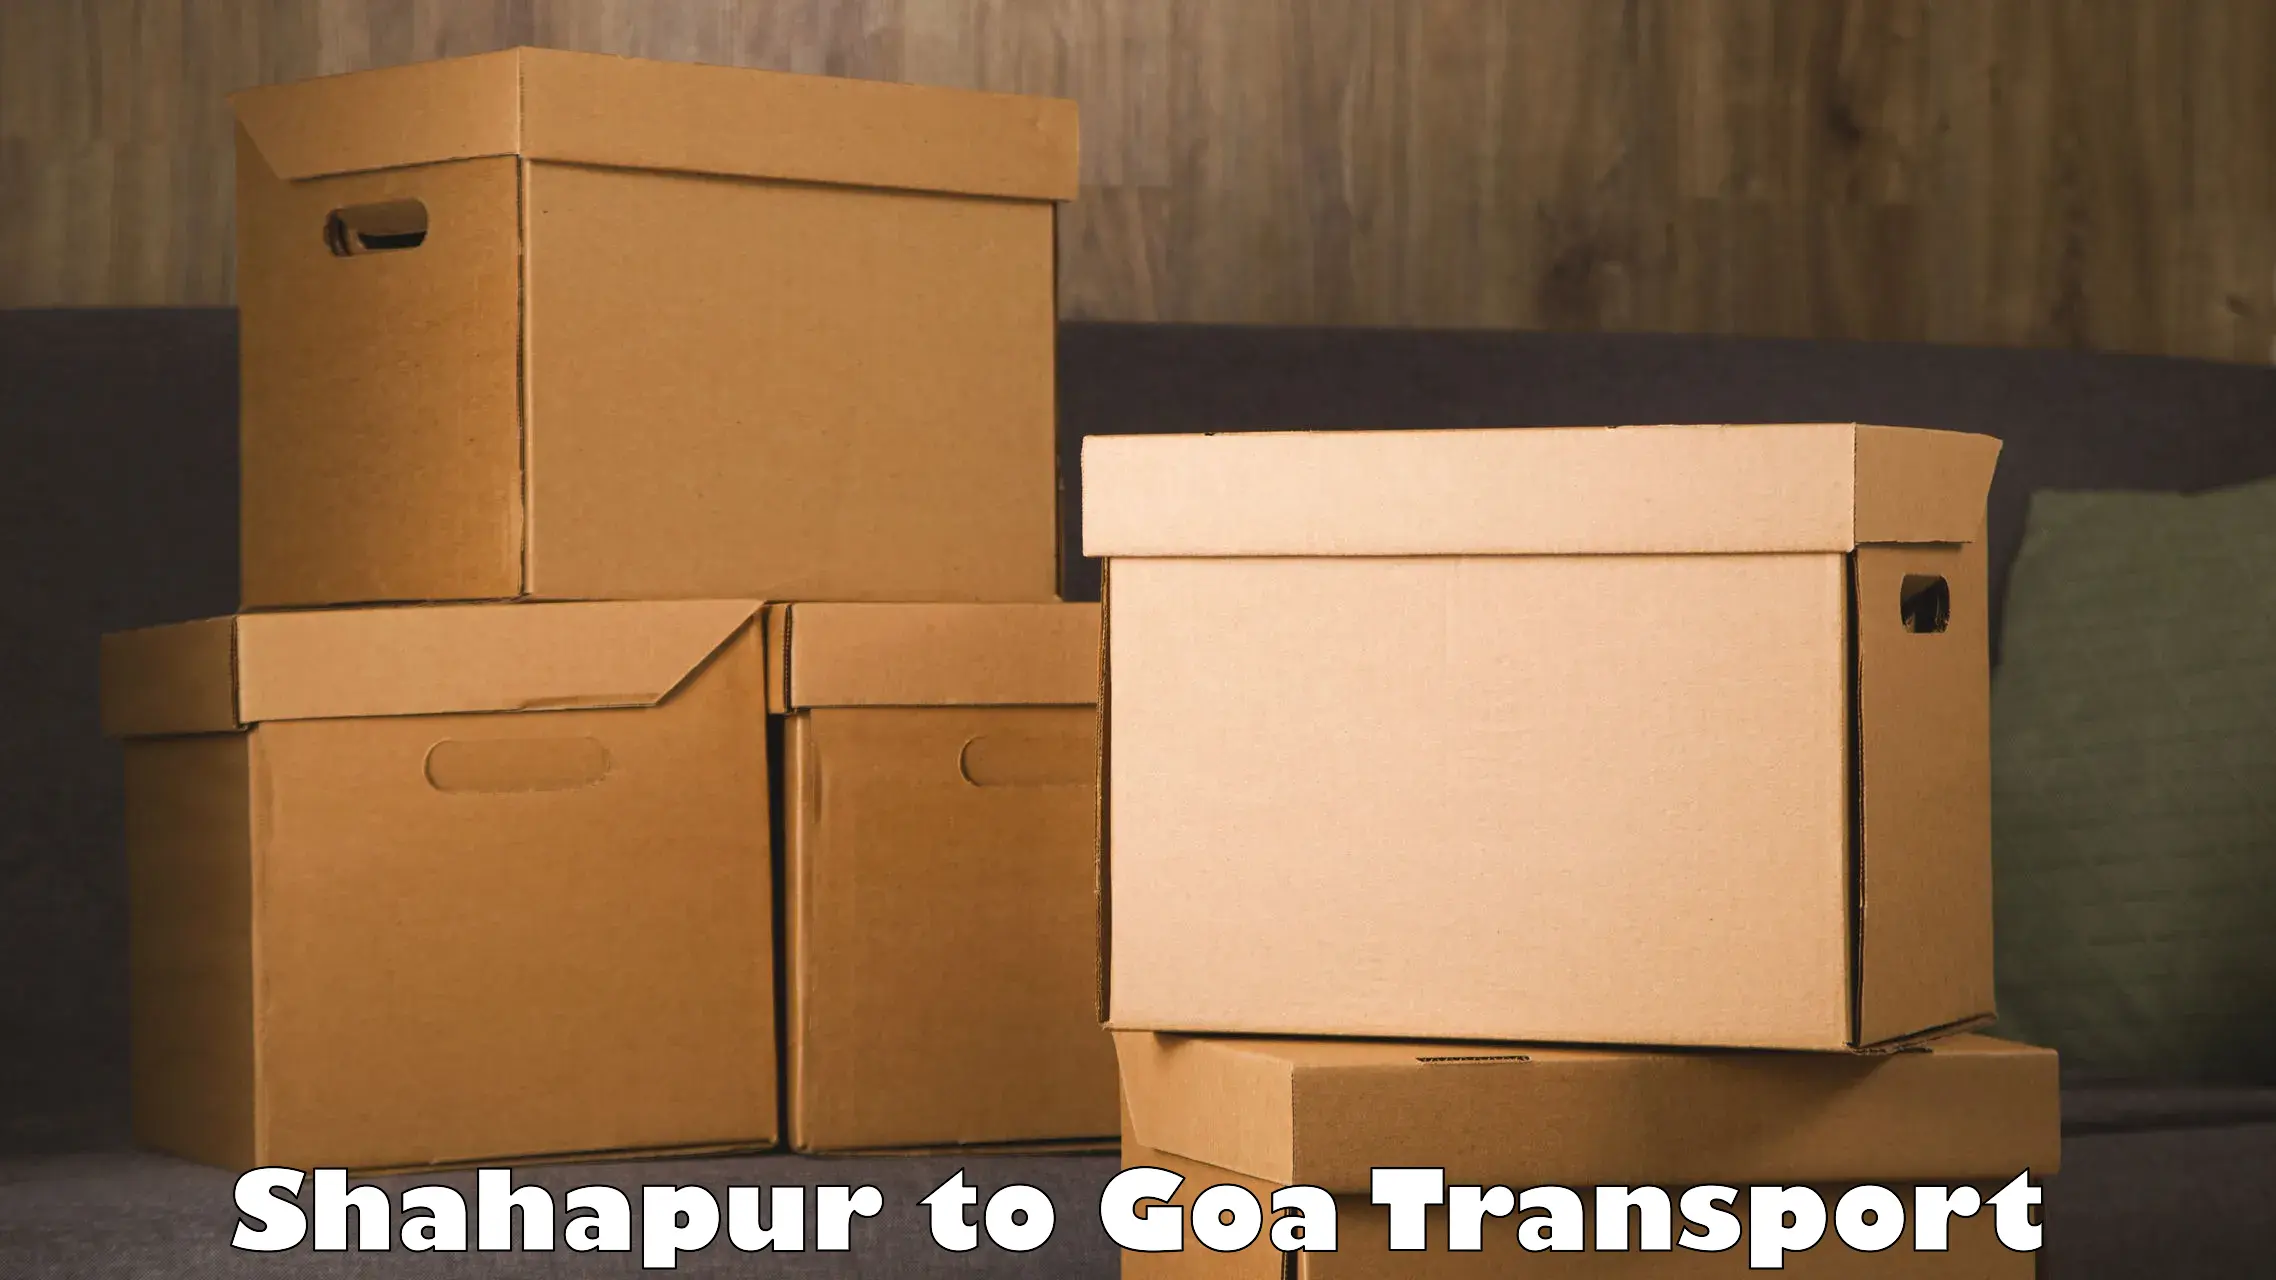 Commercial transport service Shahapur to Bardez